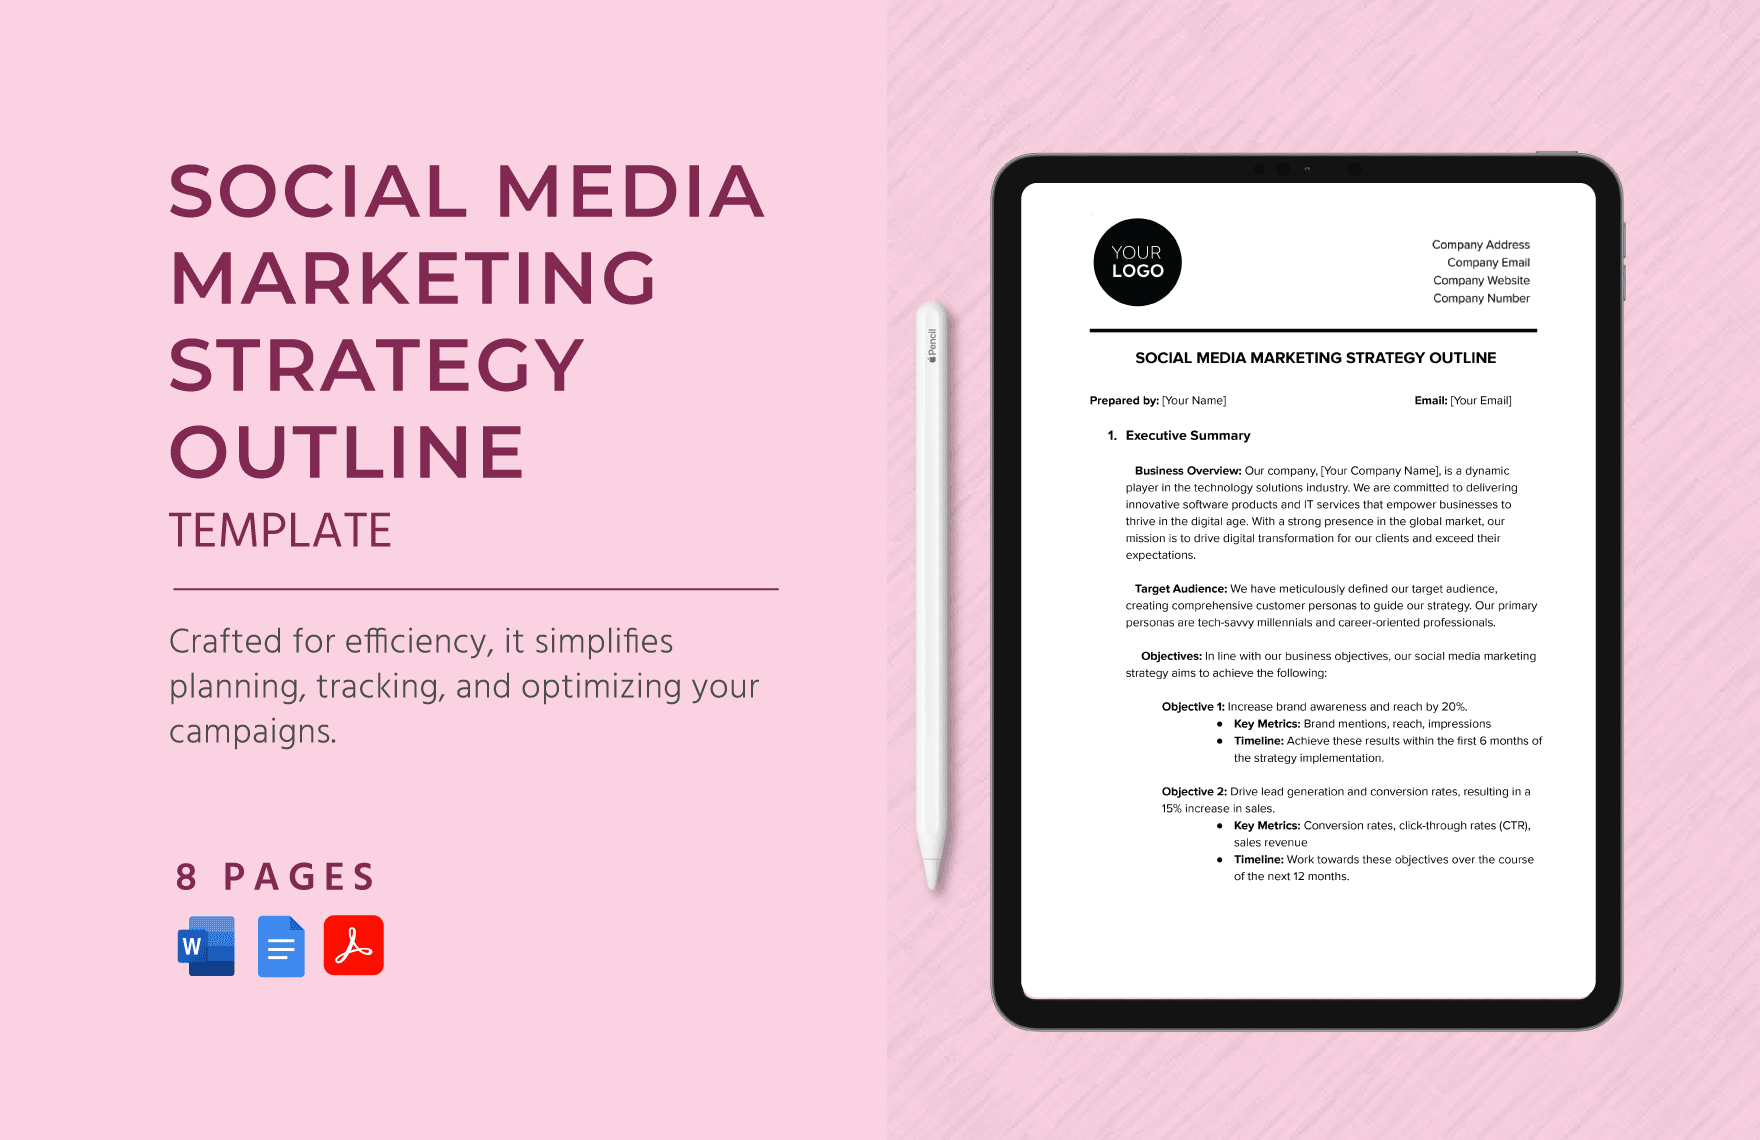 Social Media Marketing Strategy Outline Template in Word, Google Docs, PDF